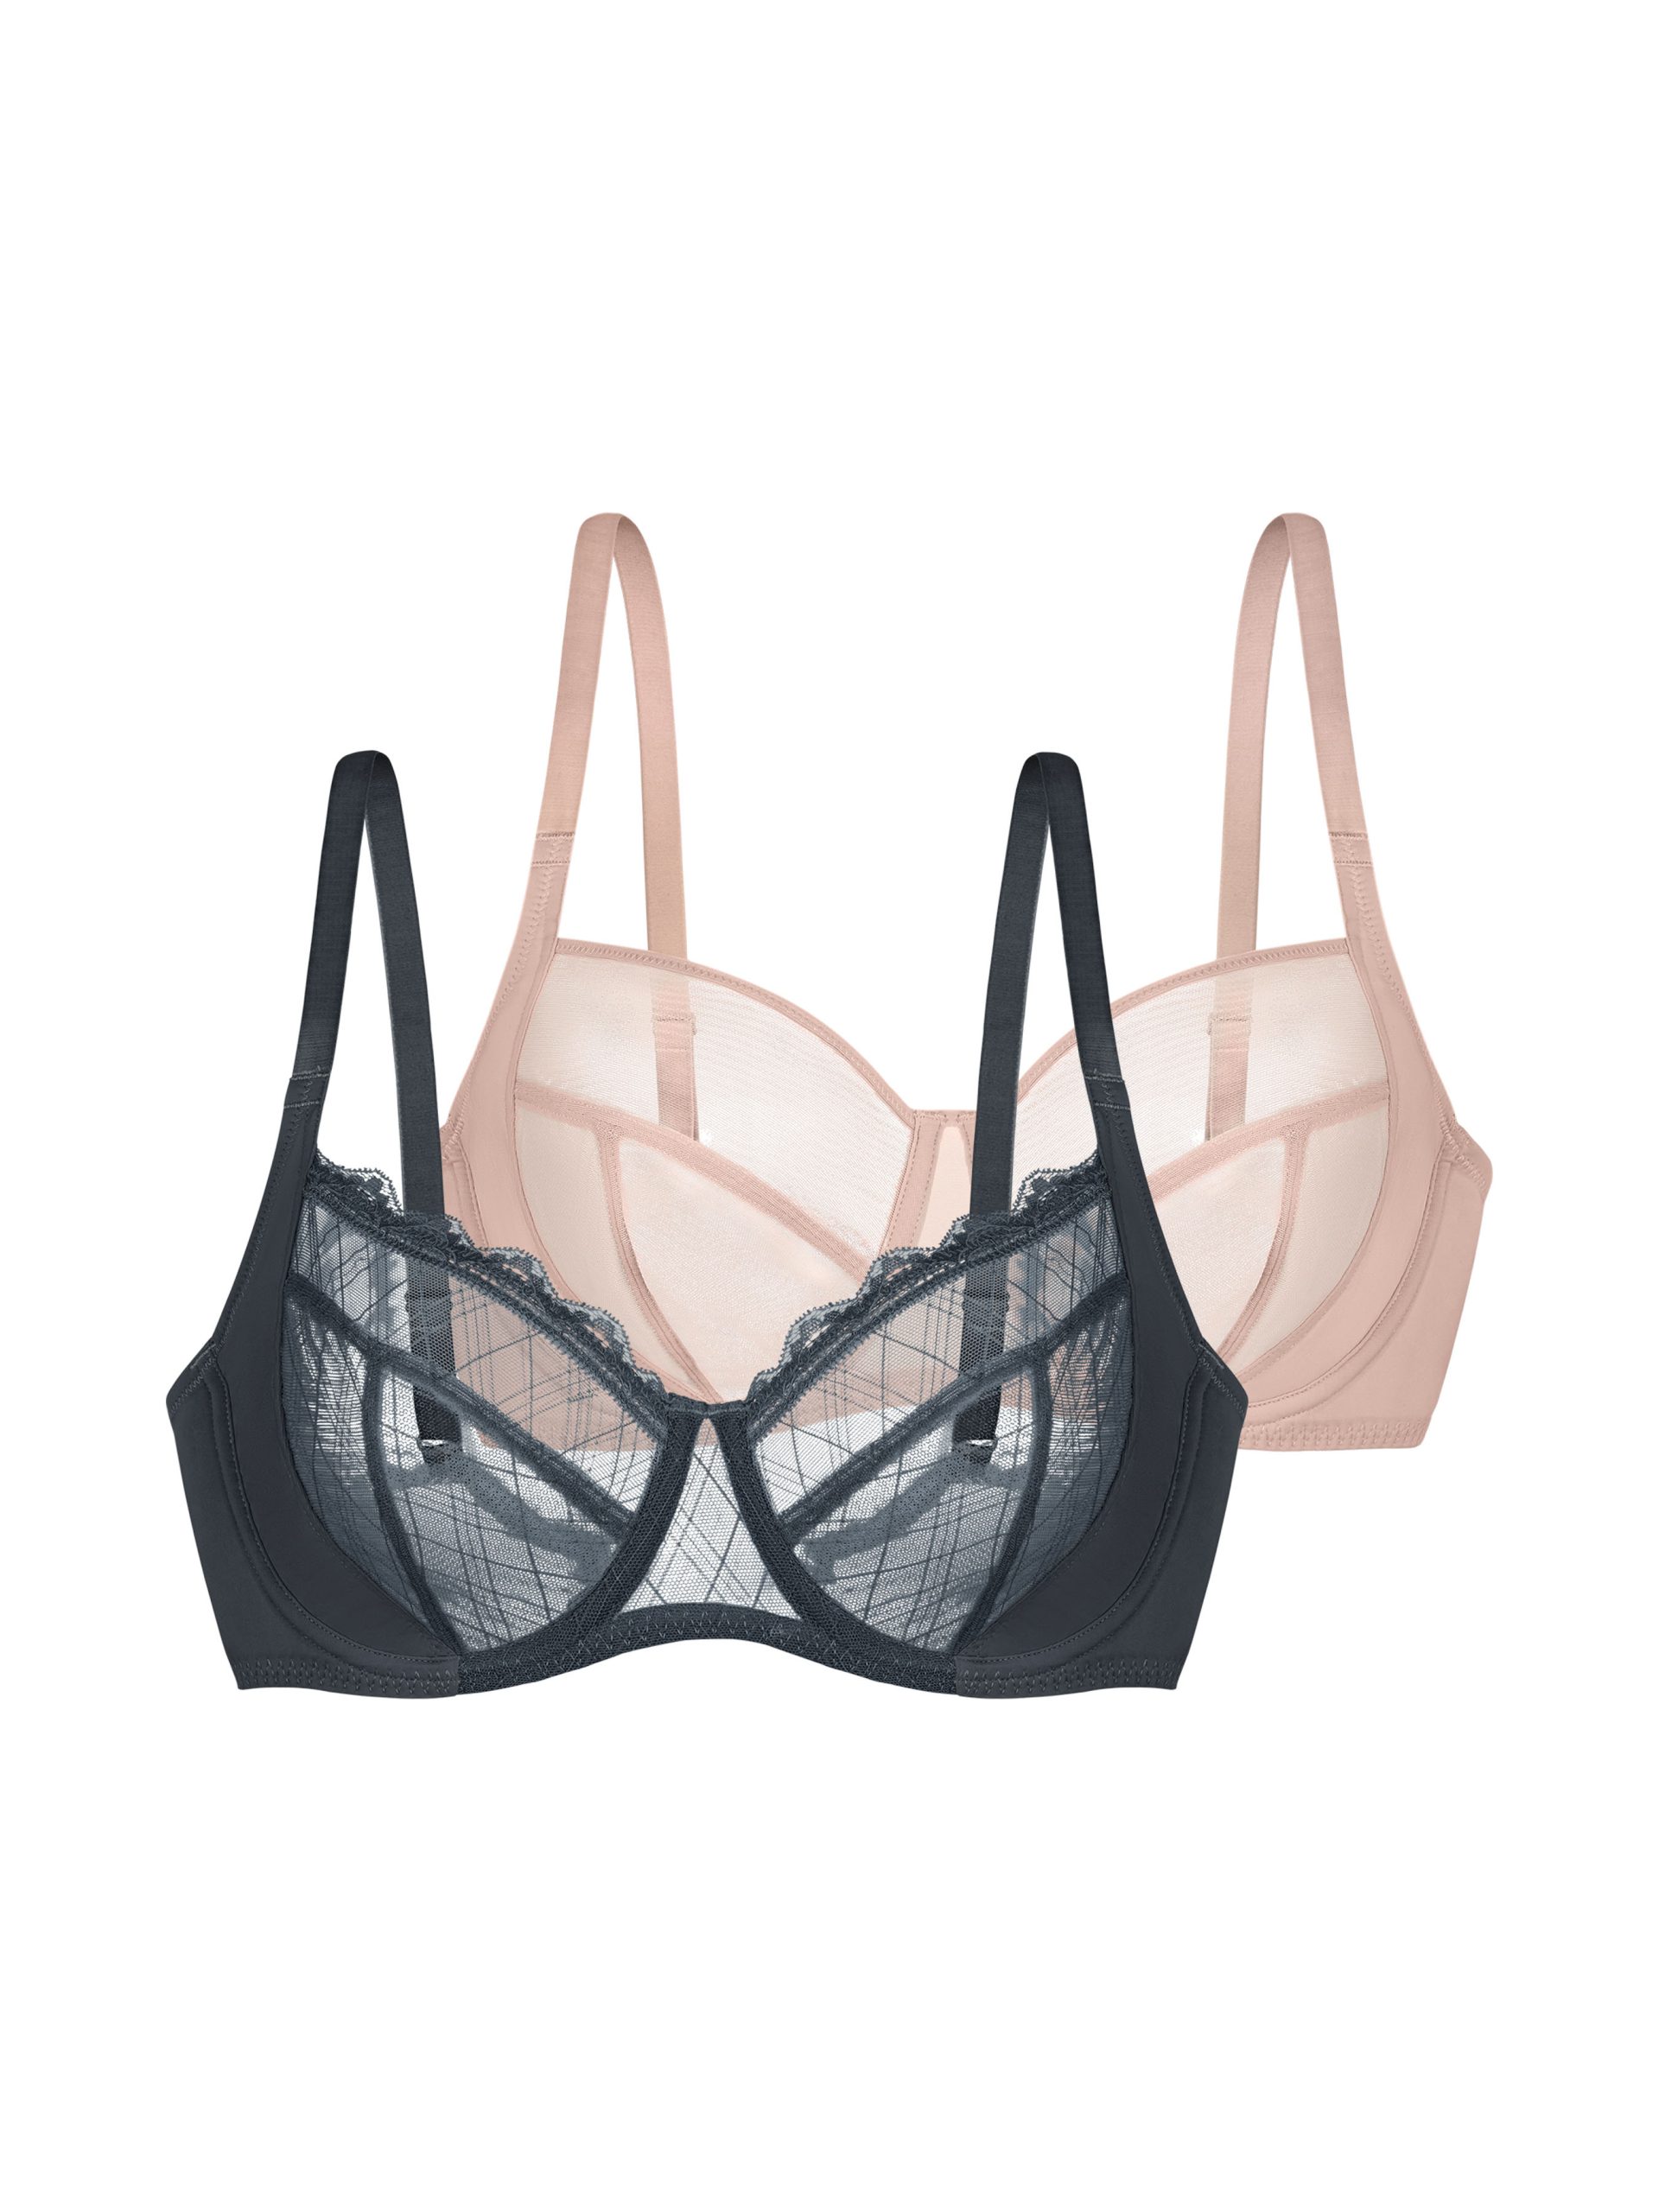 UDVD Self Design Mesh Non Wired Non Padded Bra 42 Size D Cup Firozi Color